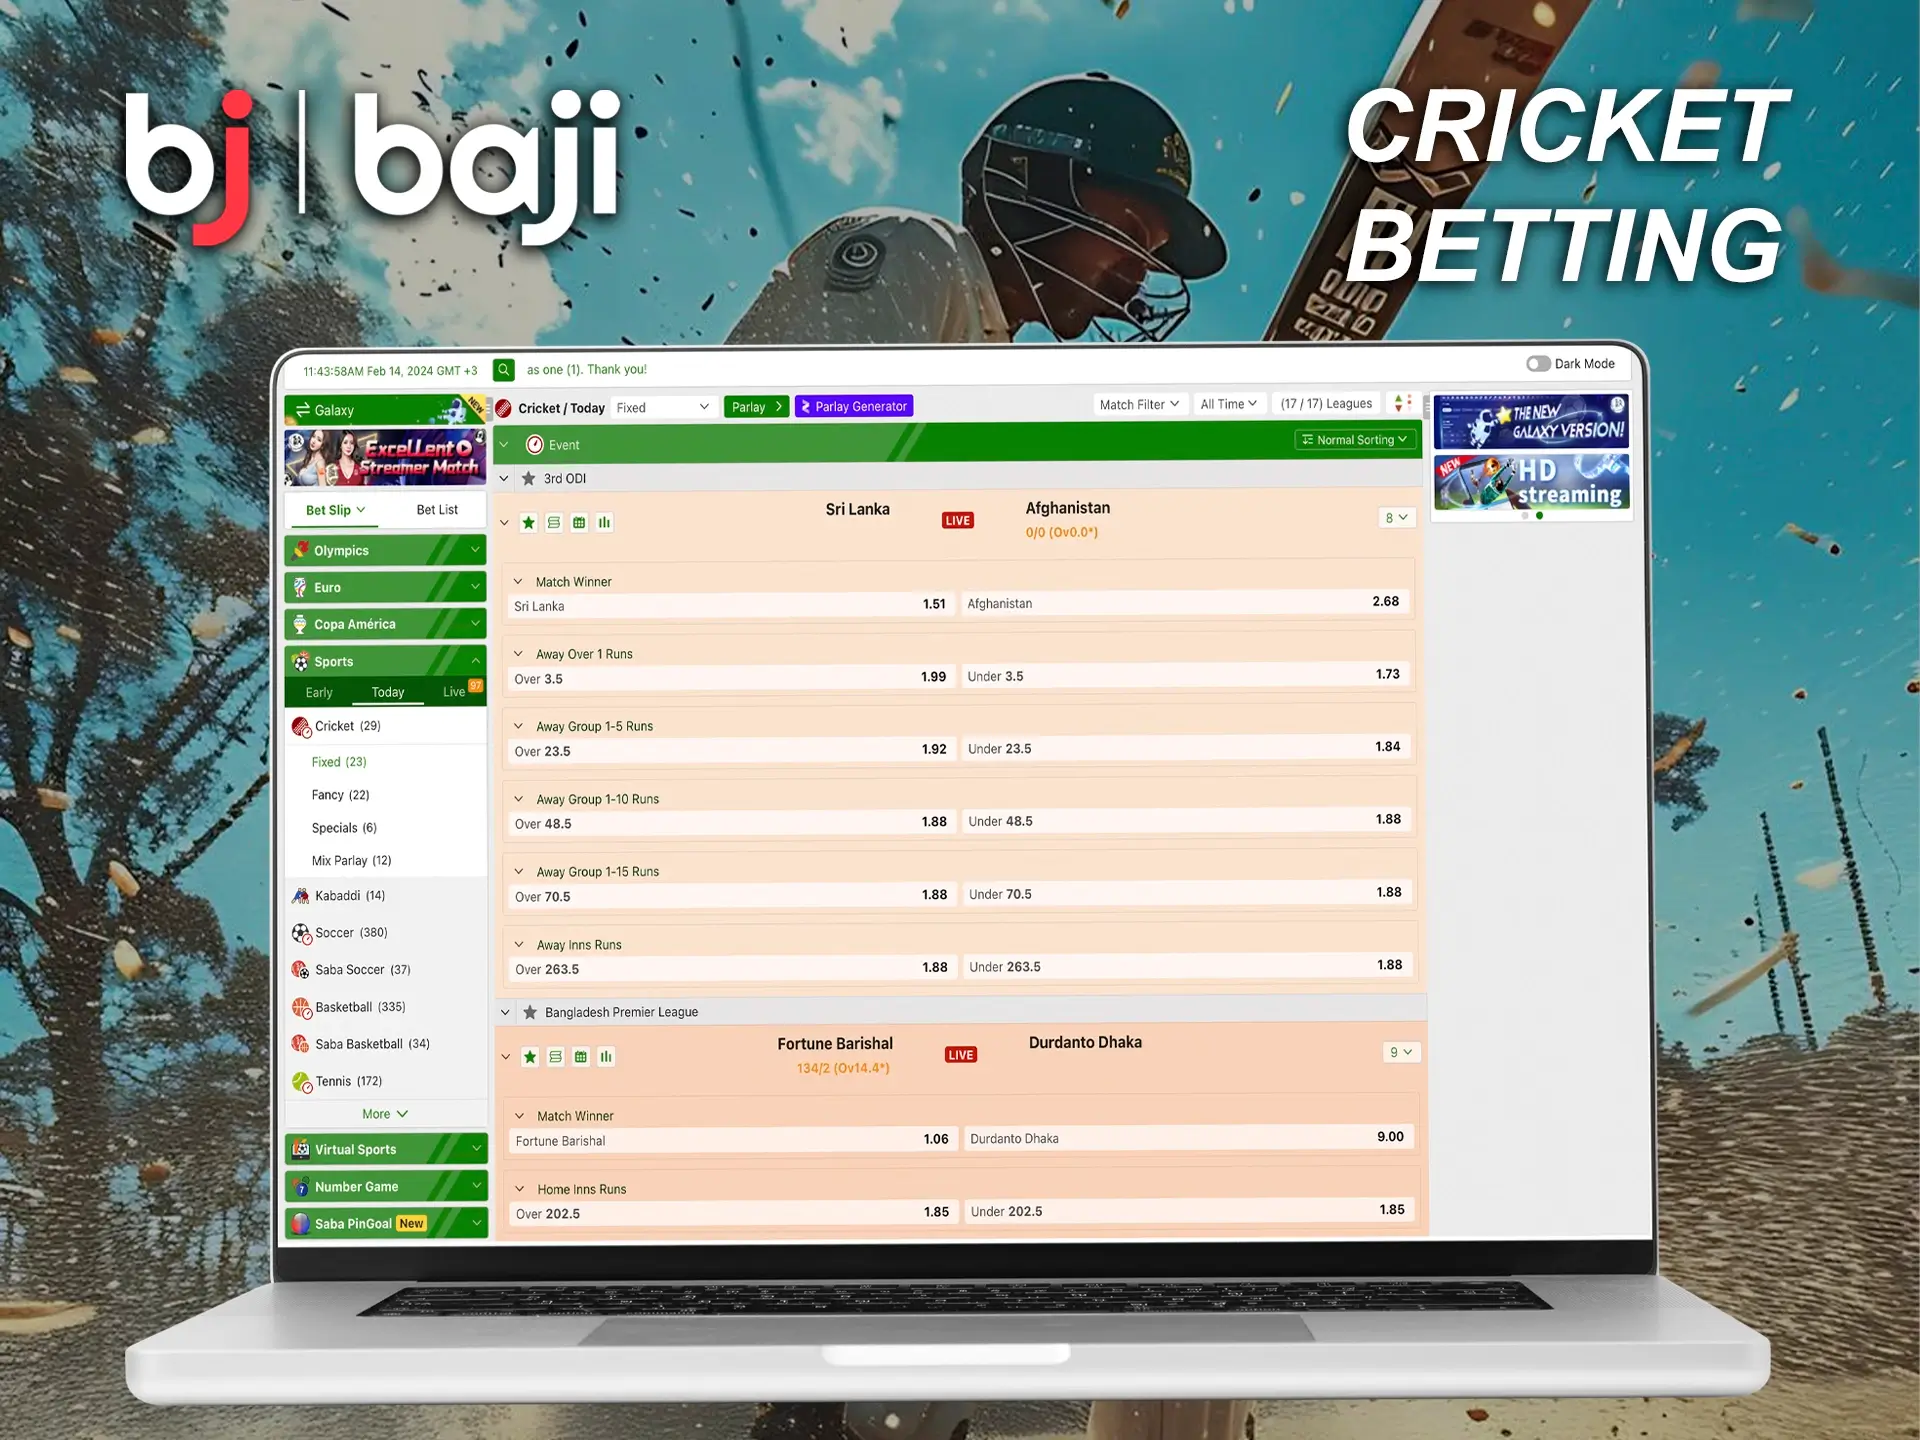 Place your cricket bets and withdraw your winnings from Baji Casino.